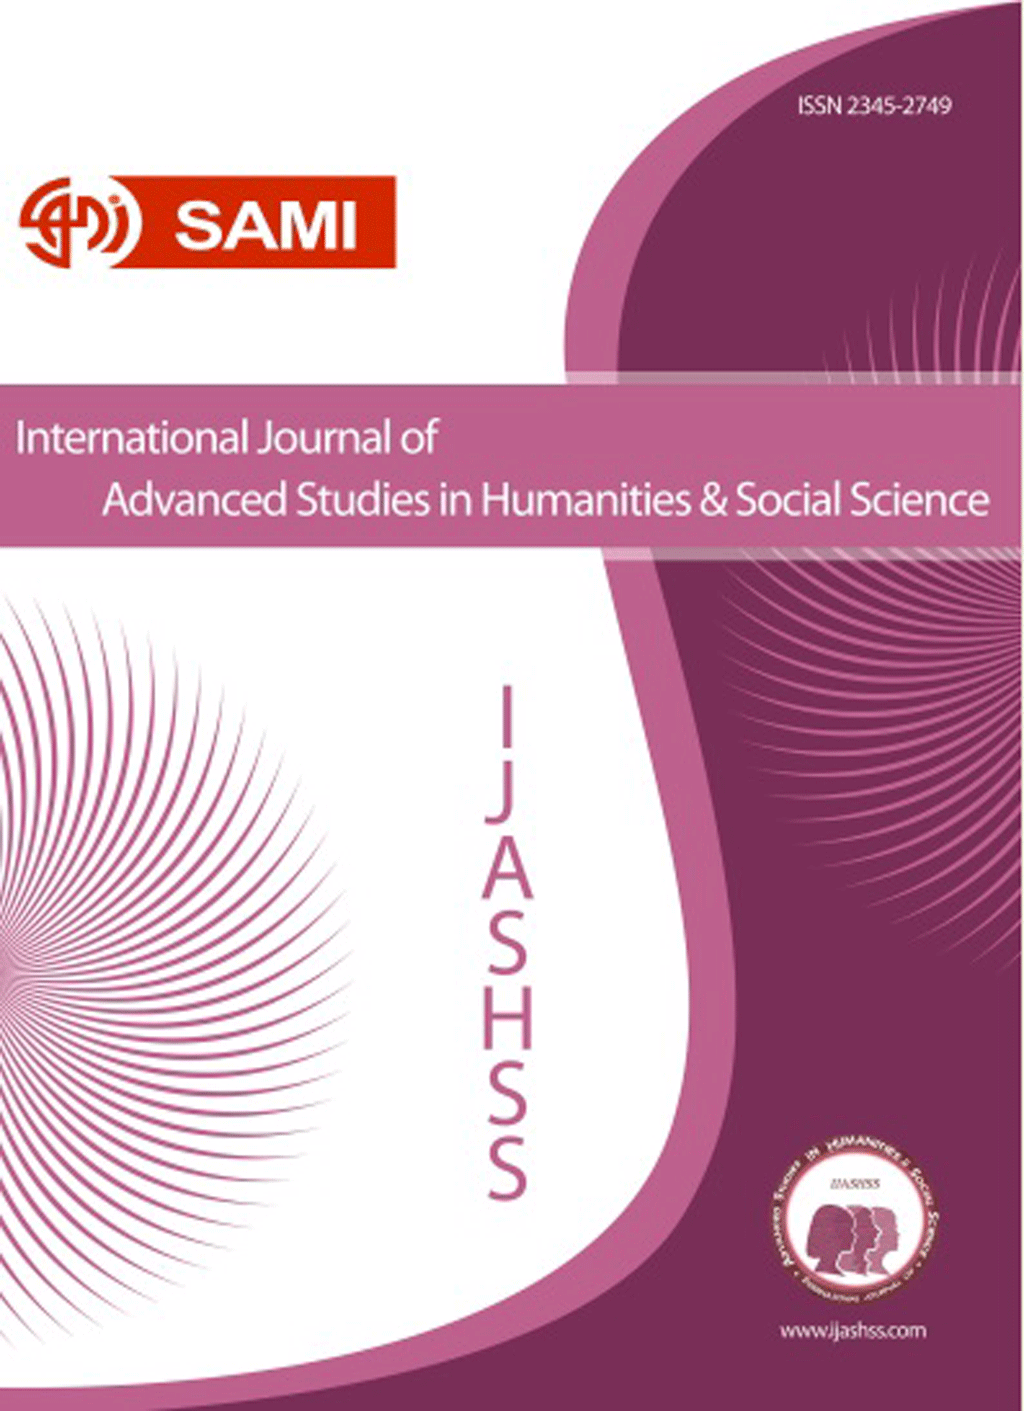 International Journal of Advanced Studies in Humanities and Social Science - April 2016, Volume 5 - Issue 2